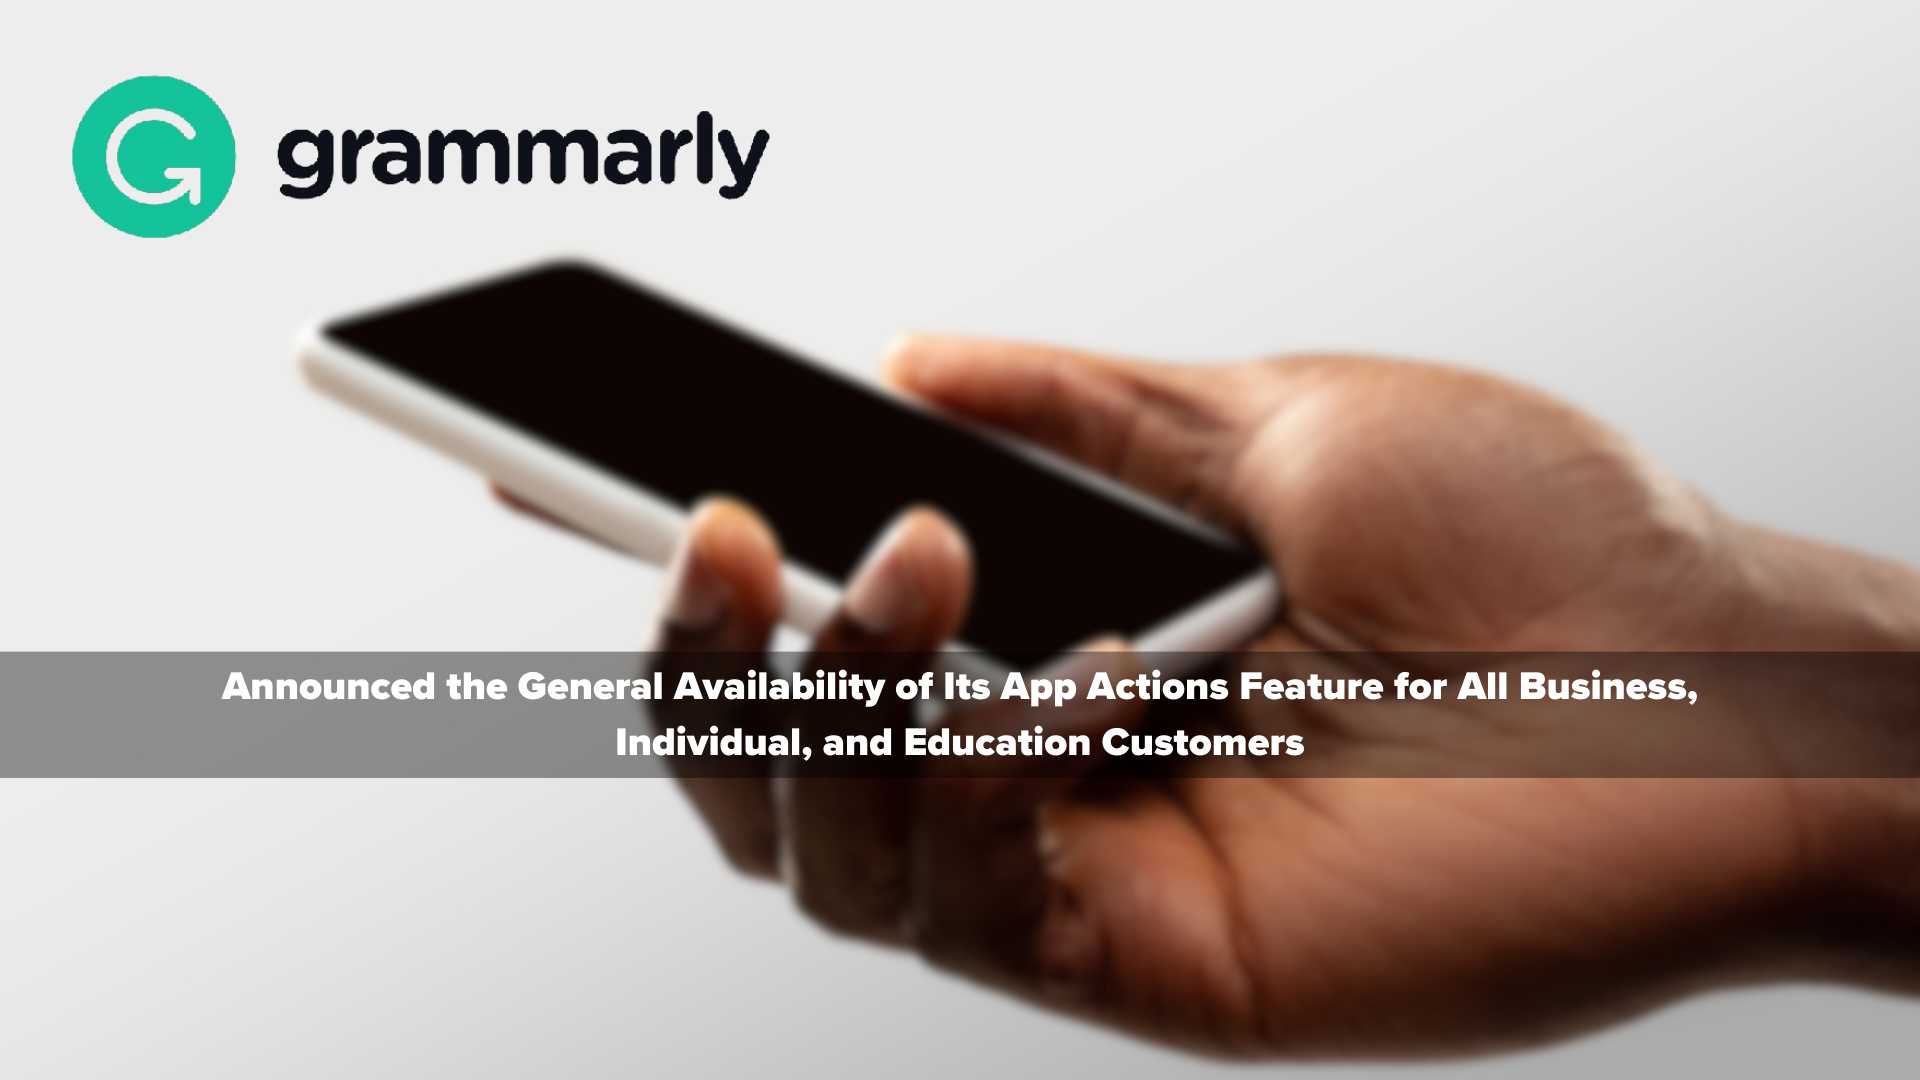 Grammarly Saves Businesses Time and Money Lost to App Overload With the General Availability of App Actions